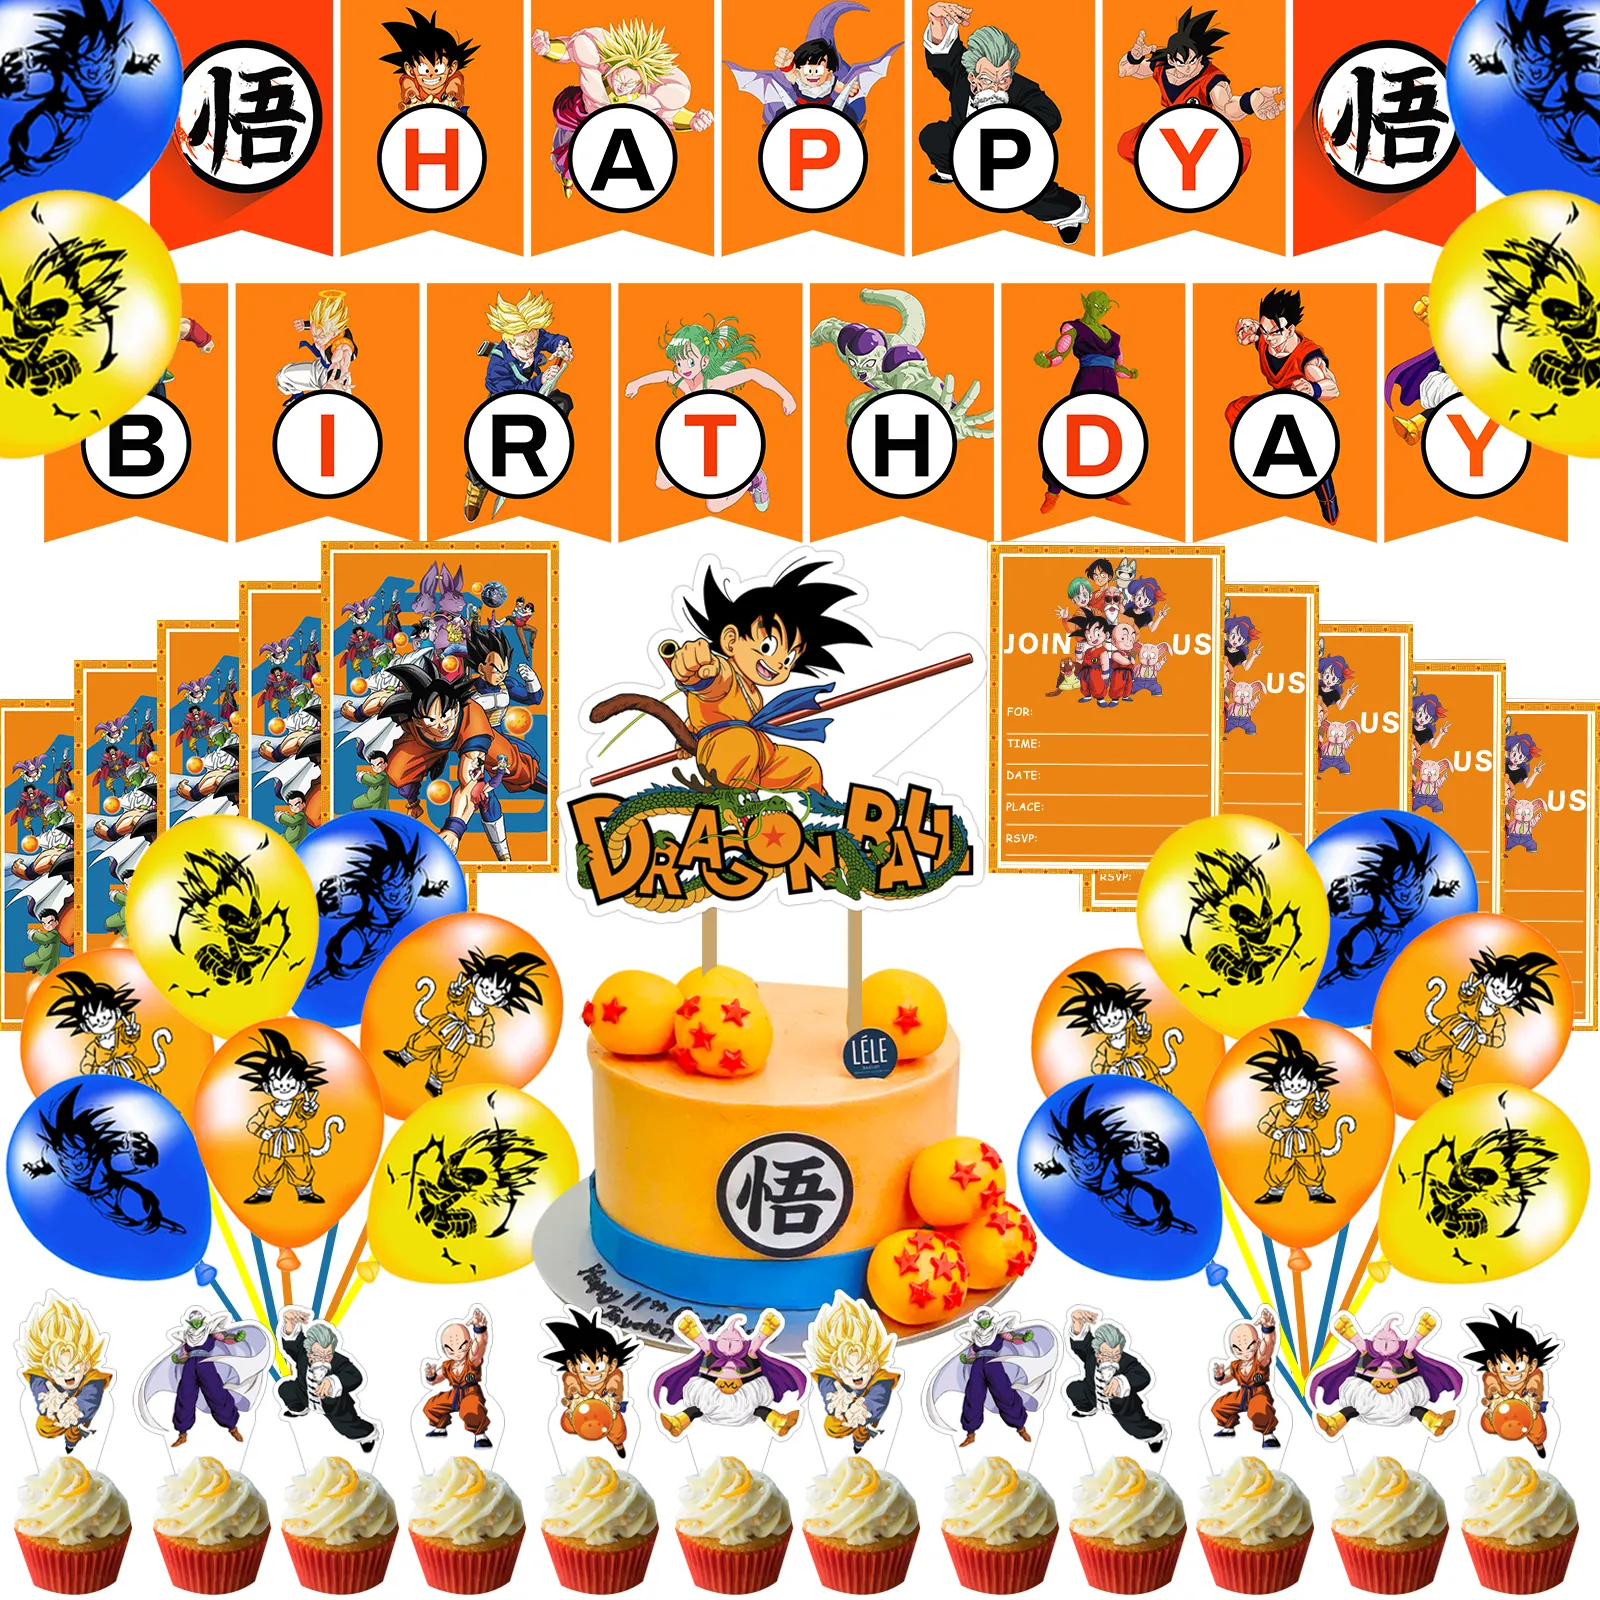 RUI YI Dragon Ball Theme party decorations Sets Anime Figures Happy Birthday Banner flags Cupcake toppers Party Supplies